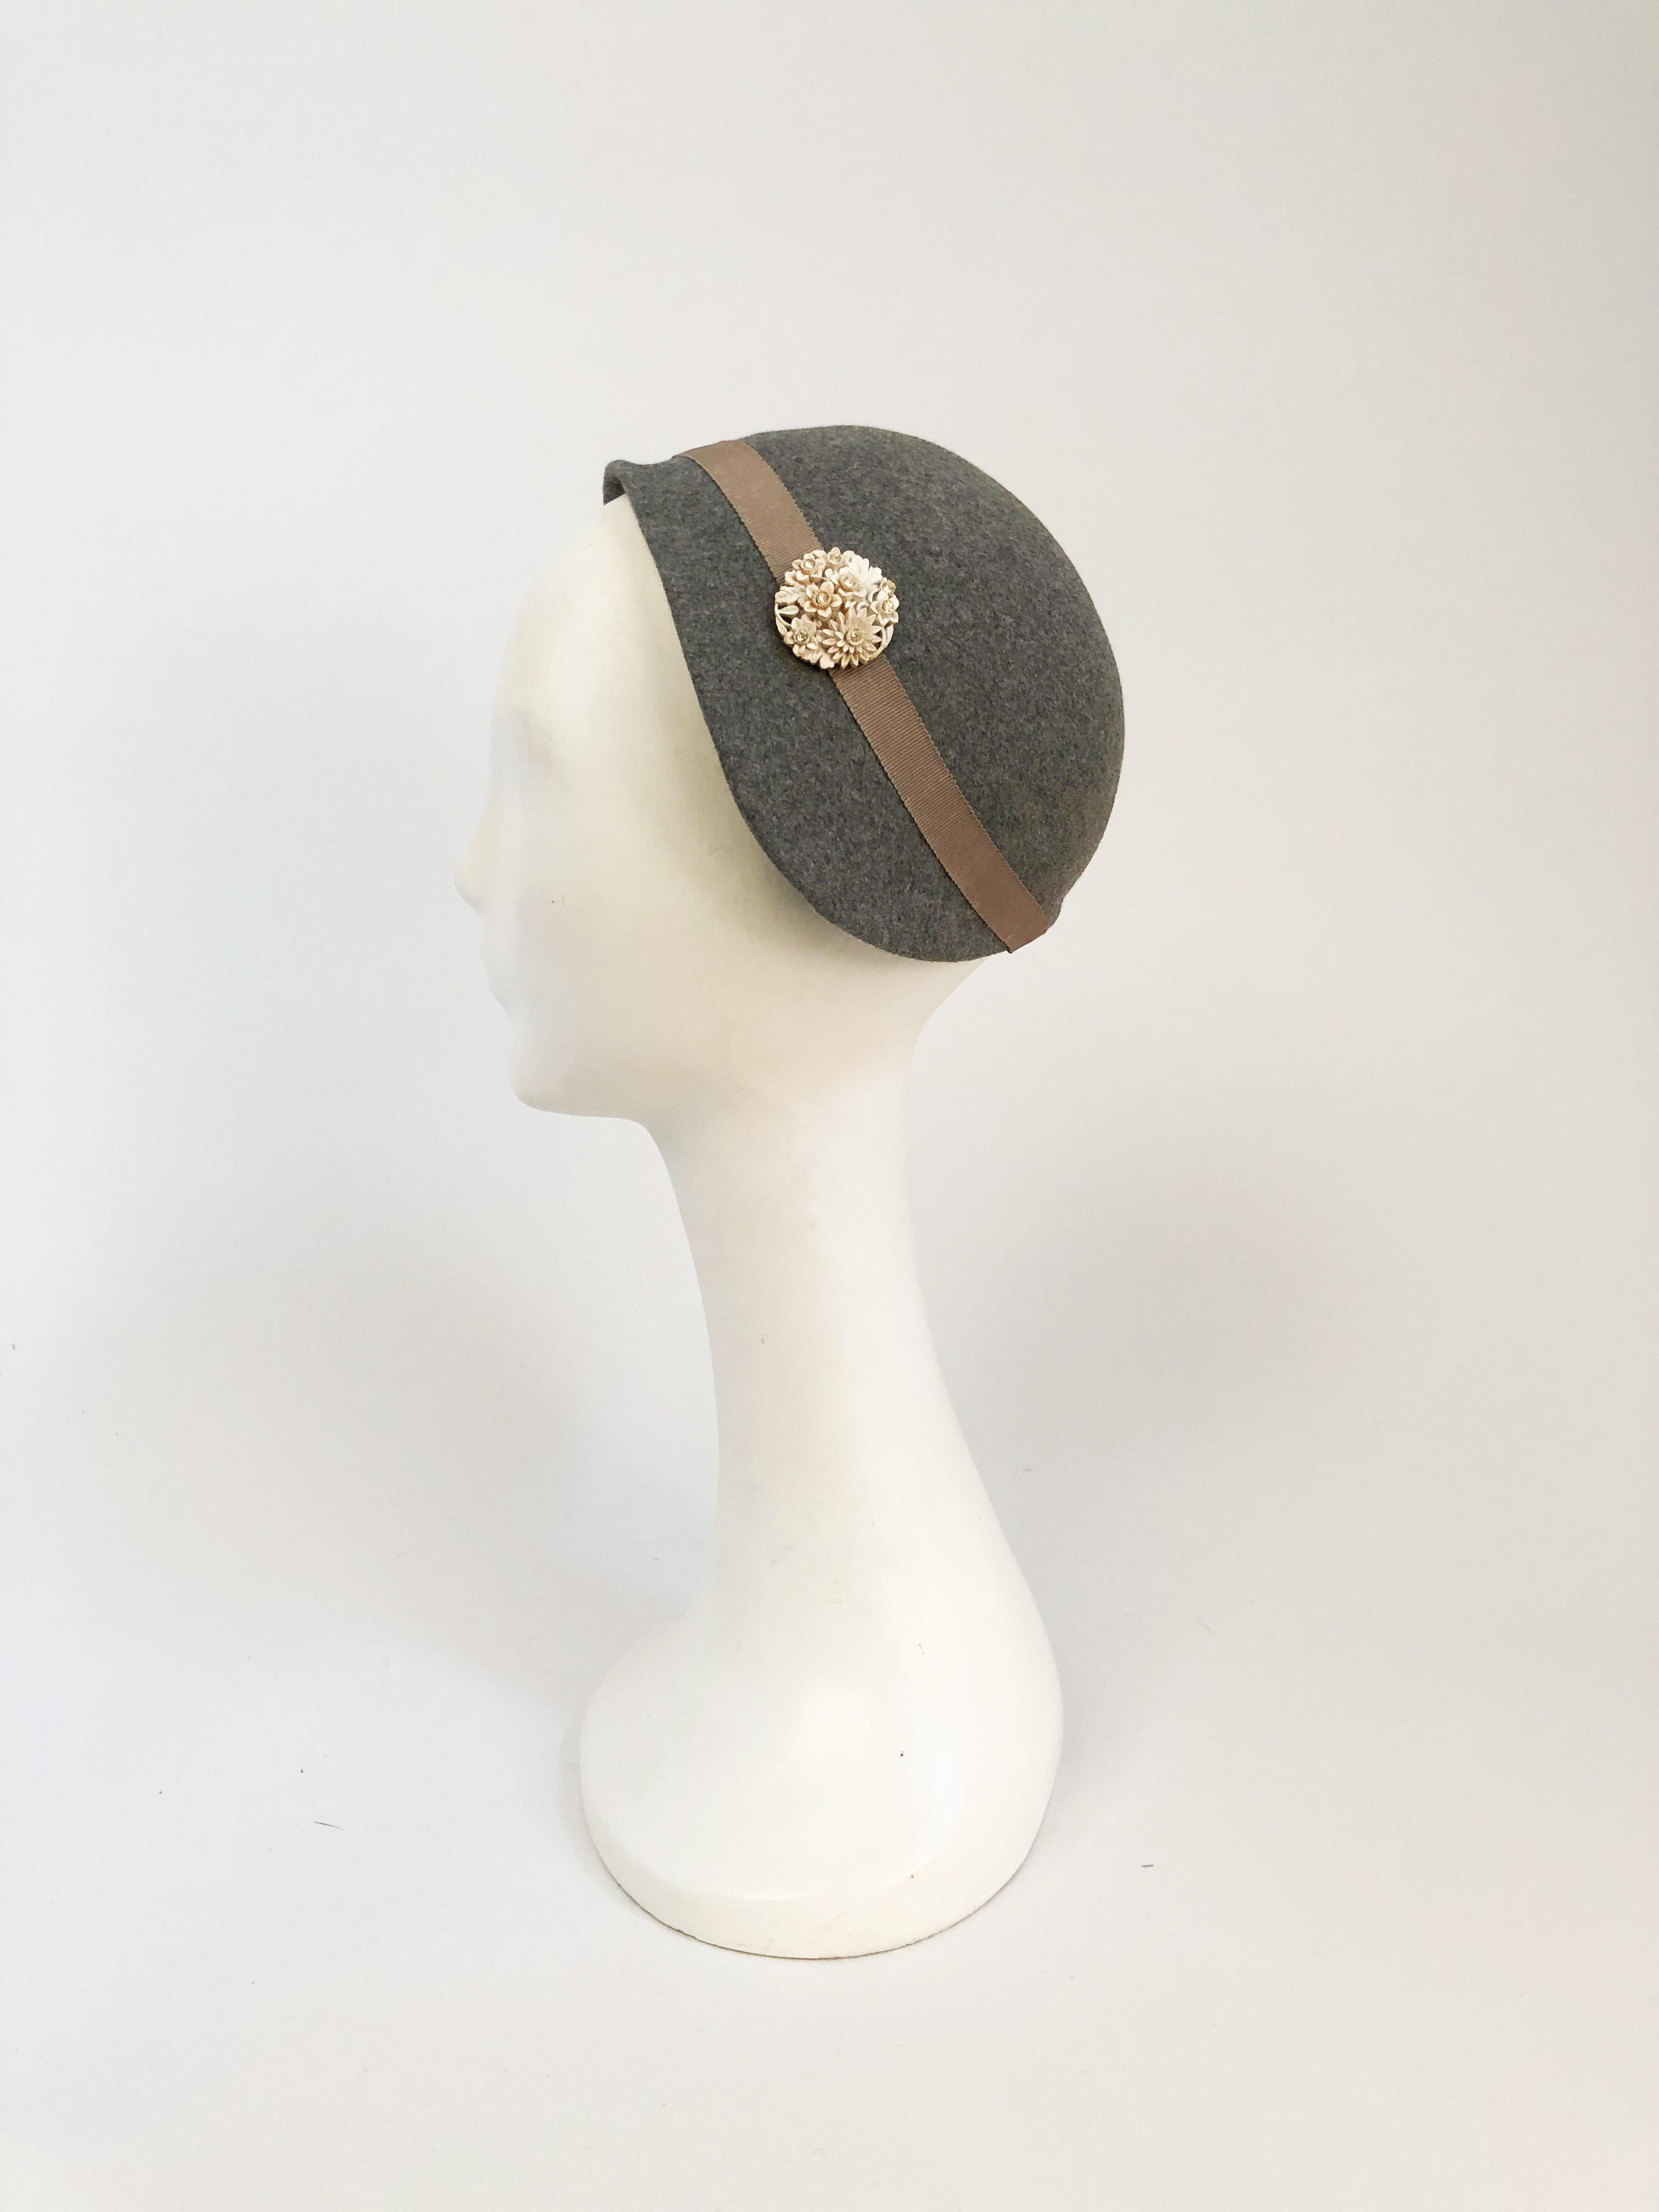 1930s Grey Cashmere Wool Hat with White Carved Button. Grey cashmere wool felt hat with gros-grain taupe hat band and floral carved button with rhinestones.